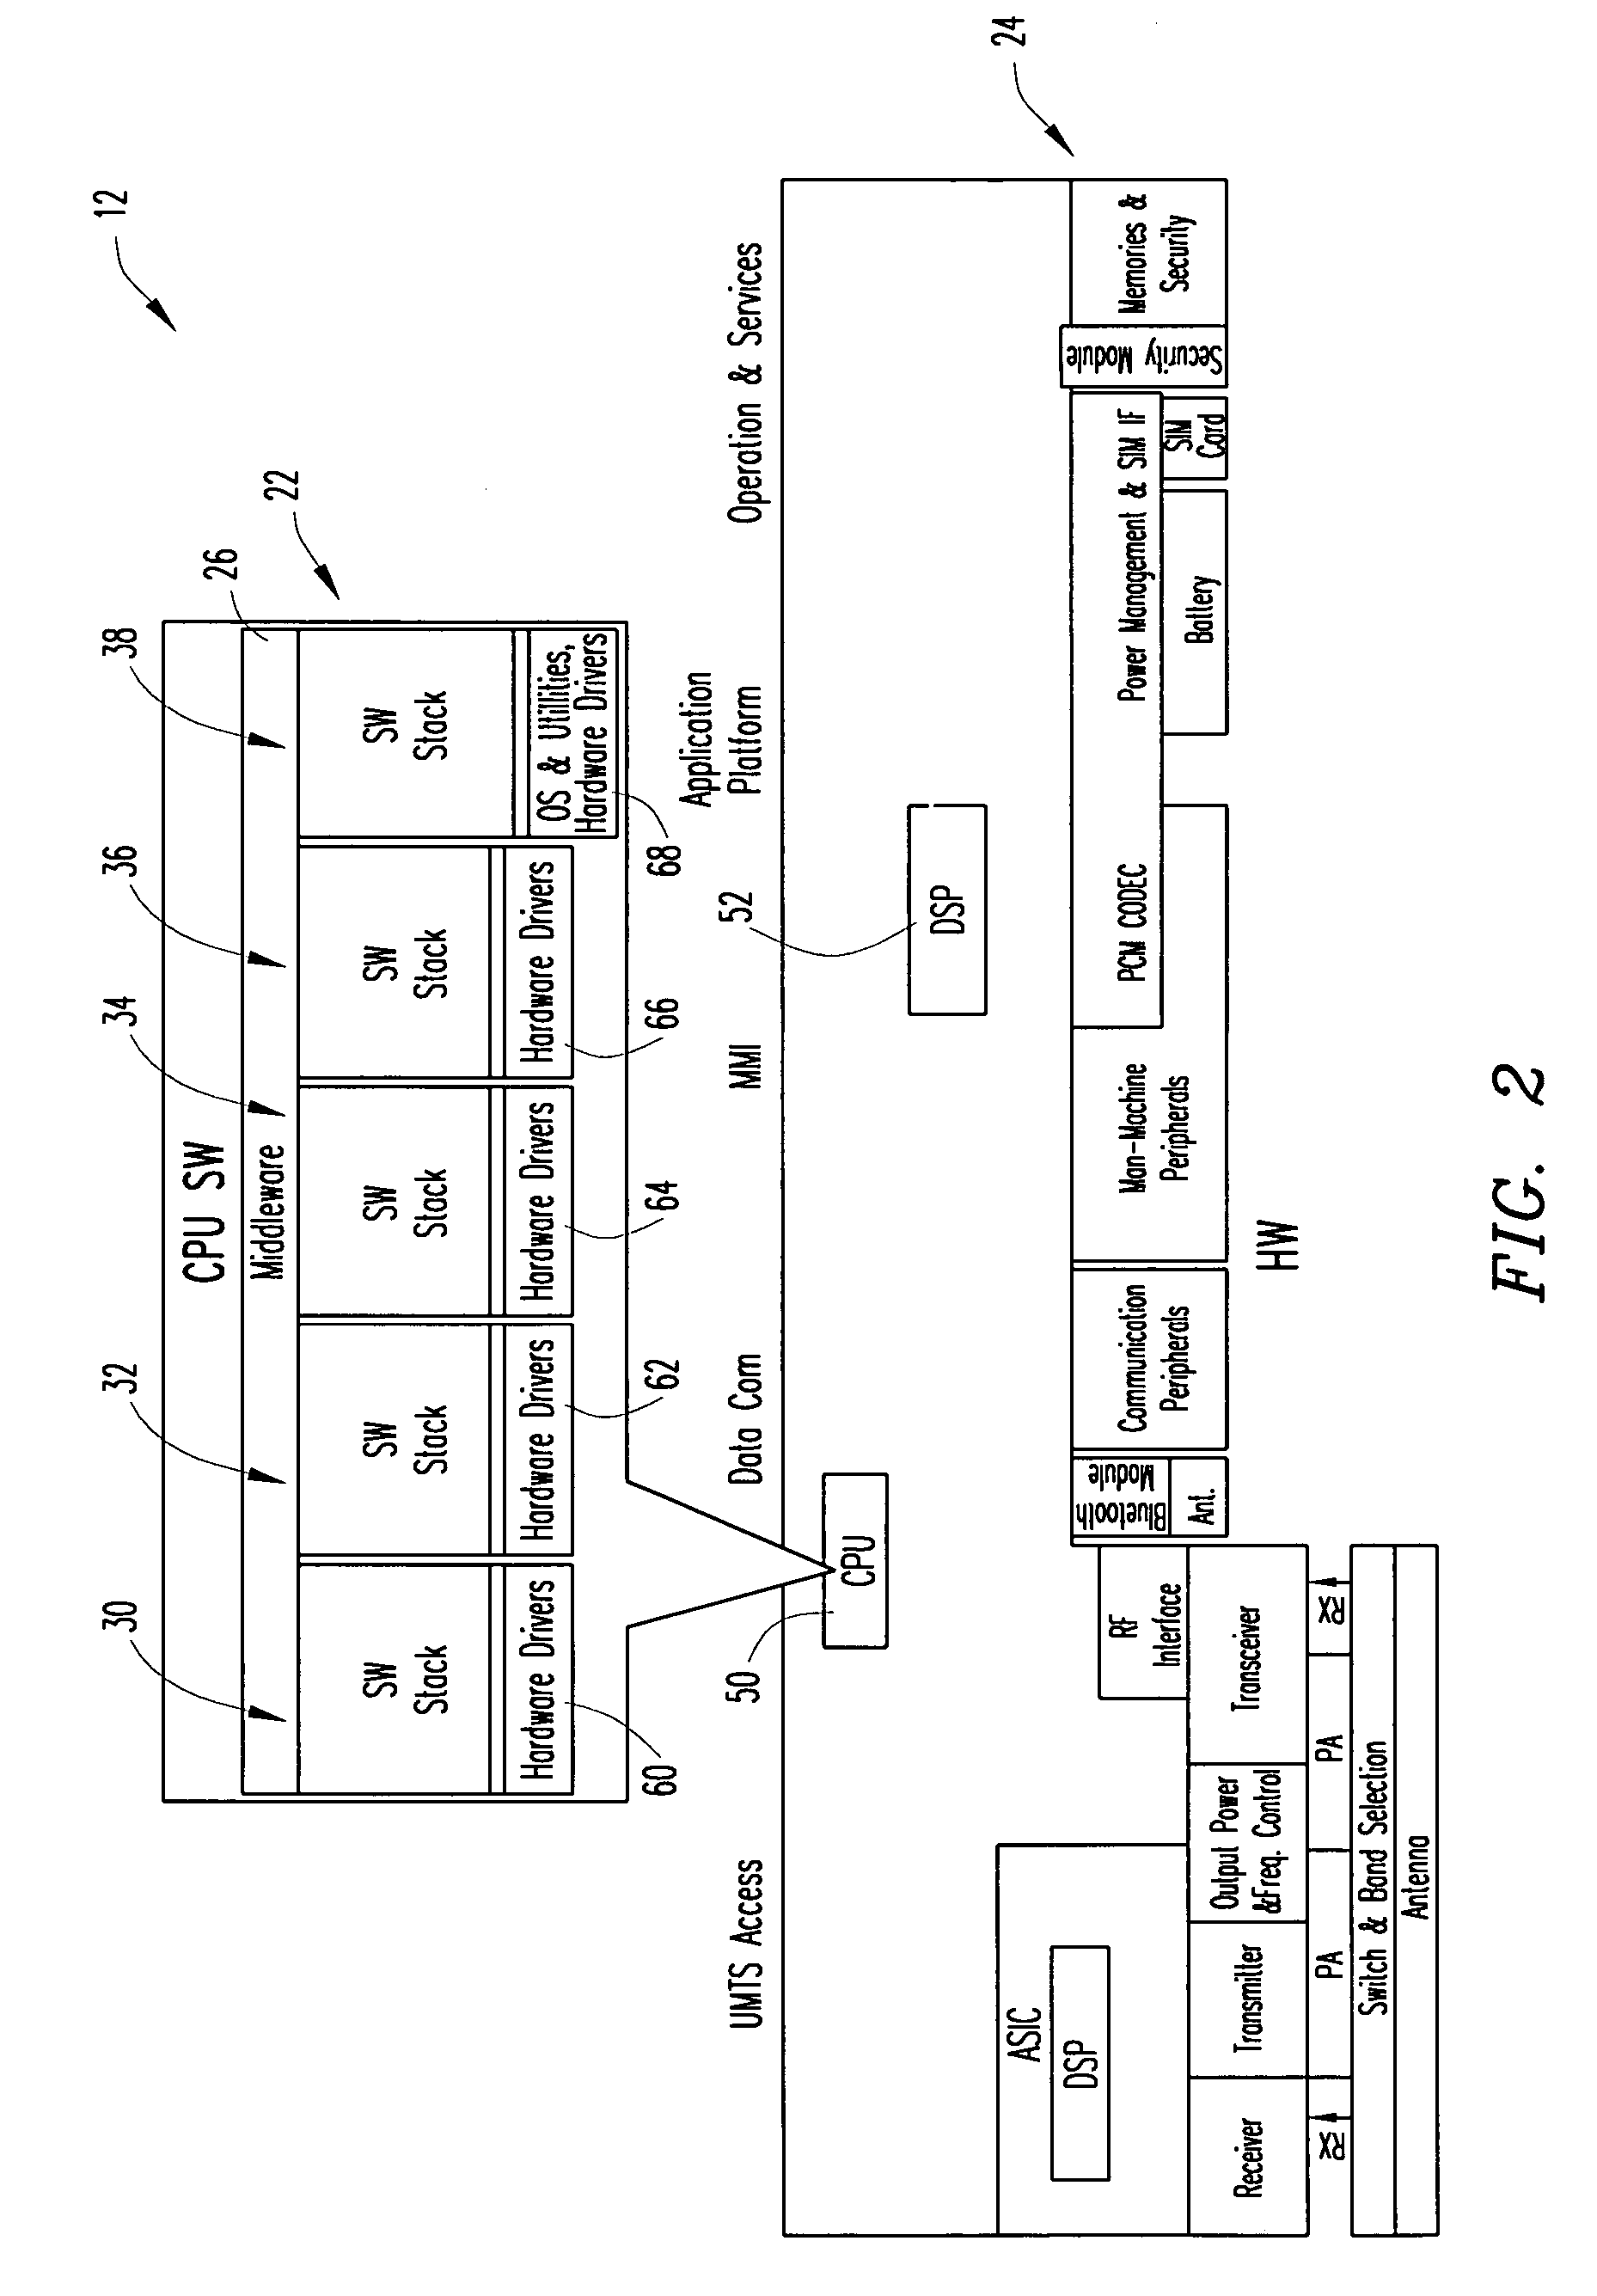 Method of and system for testing equipment during manufacturing